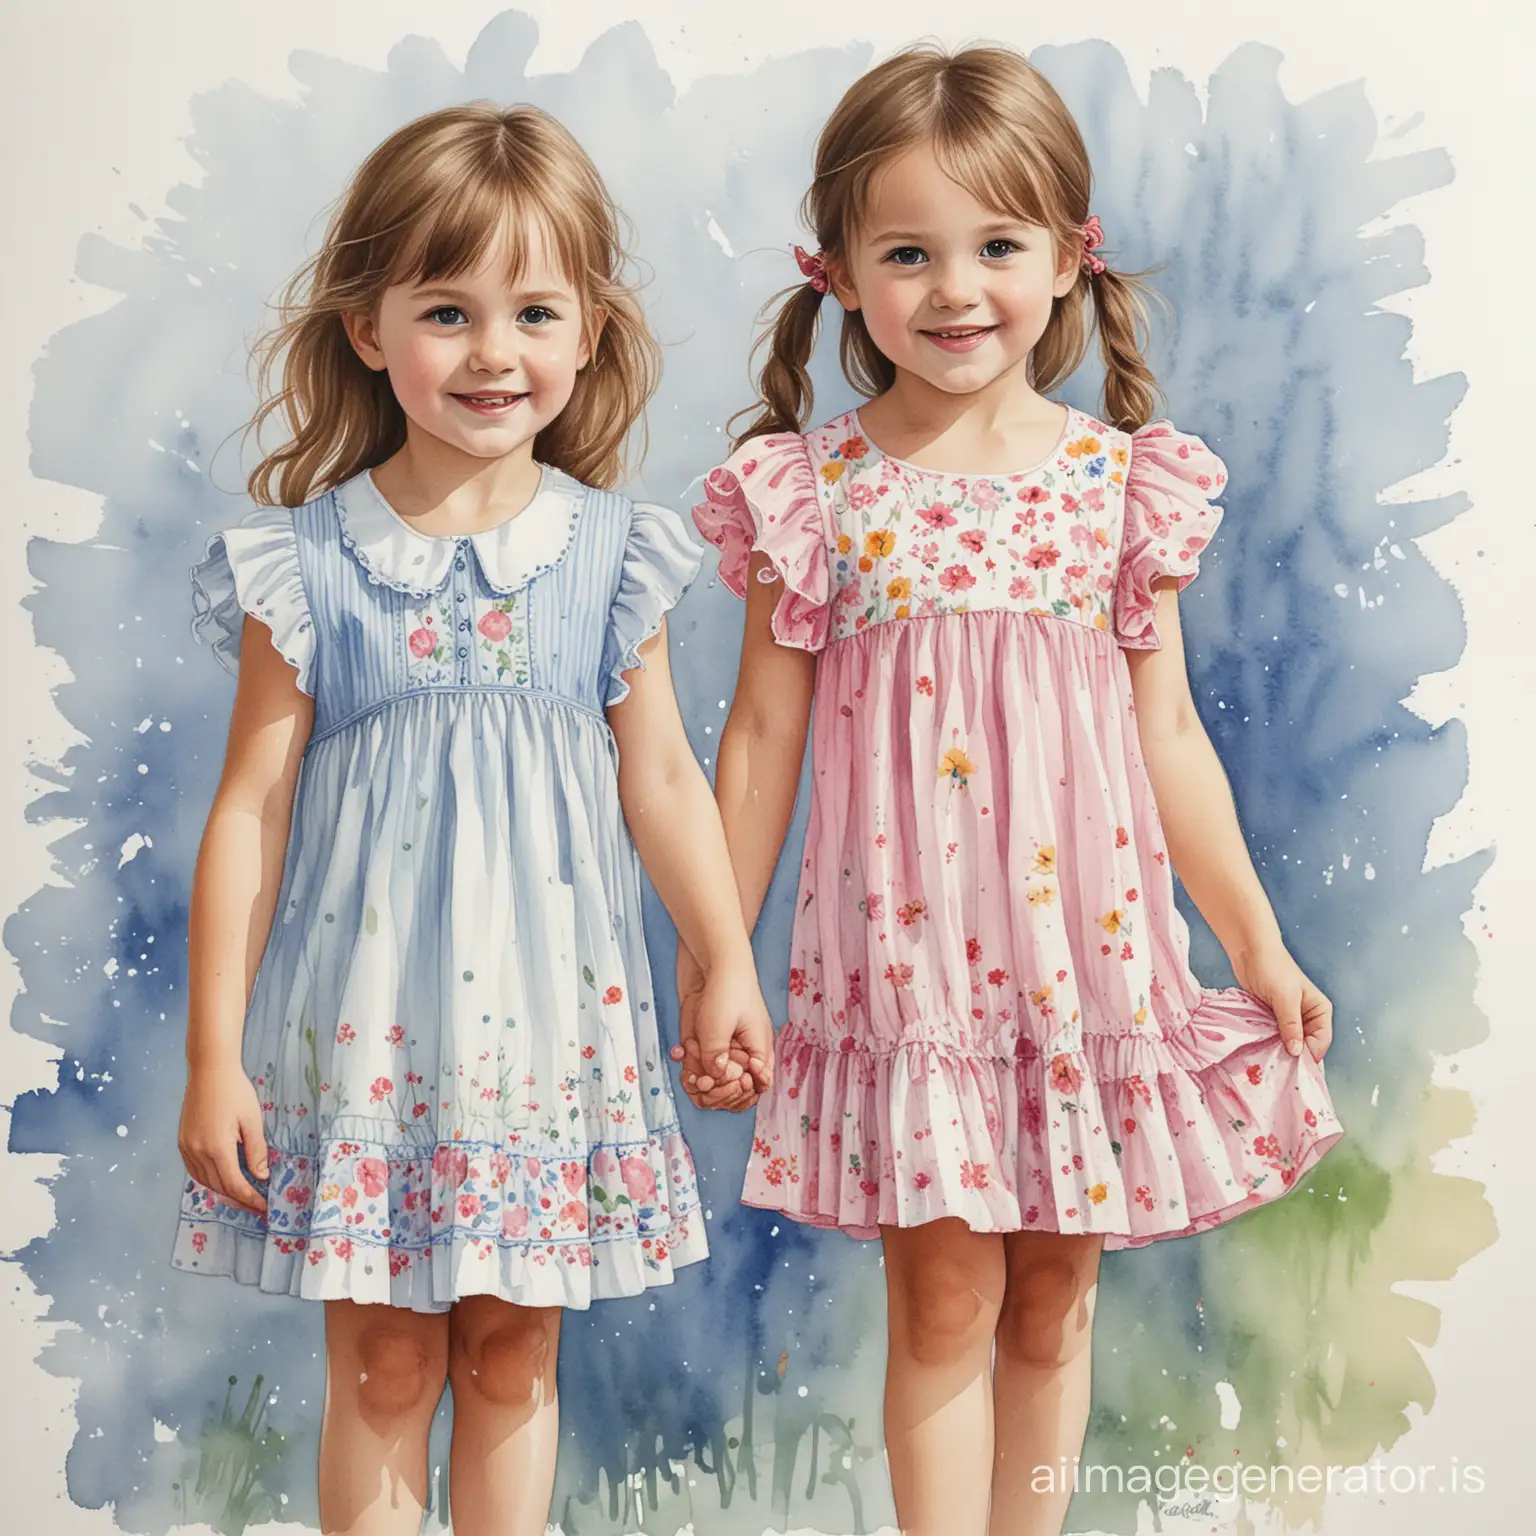 WATER COLOR DRAWING OF two girls 5 years old one girl wearing a summer dress one girl wearing skirt and a blouse